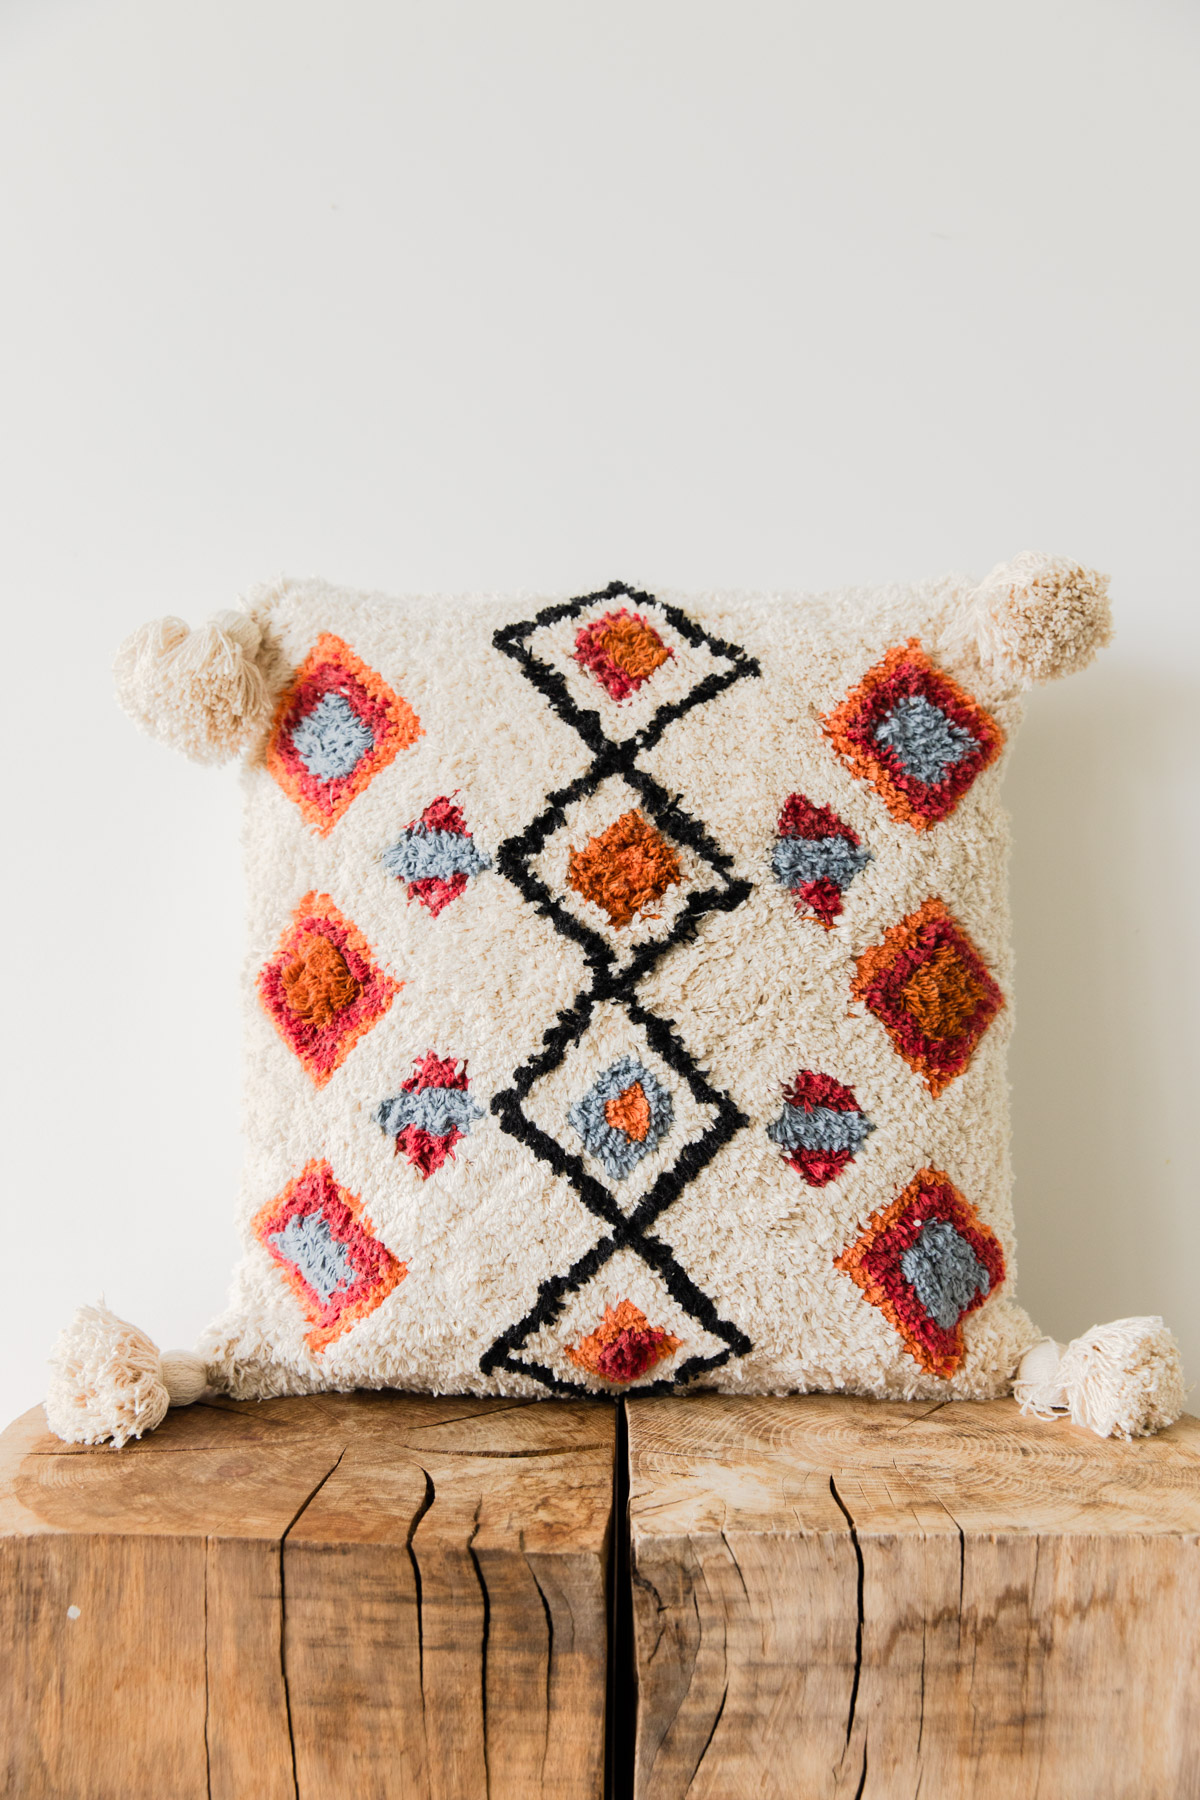 The Painted Bird Patterned Cushion with Tassels